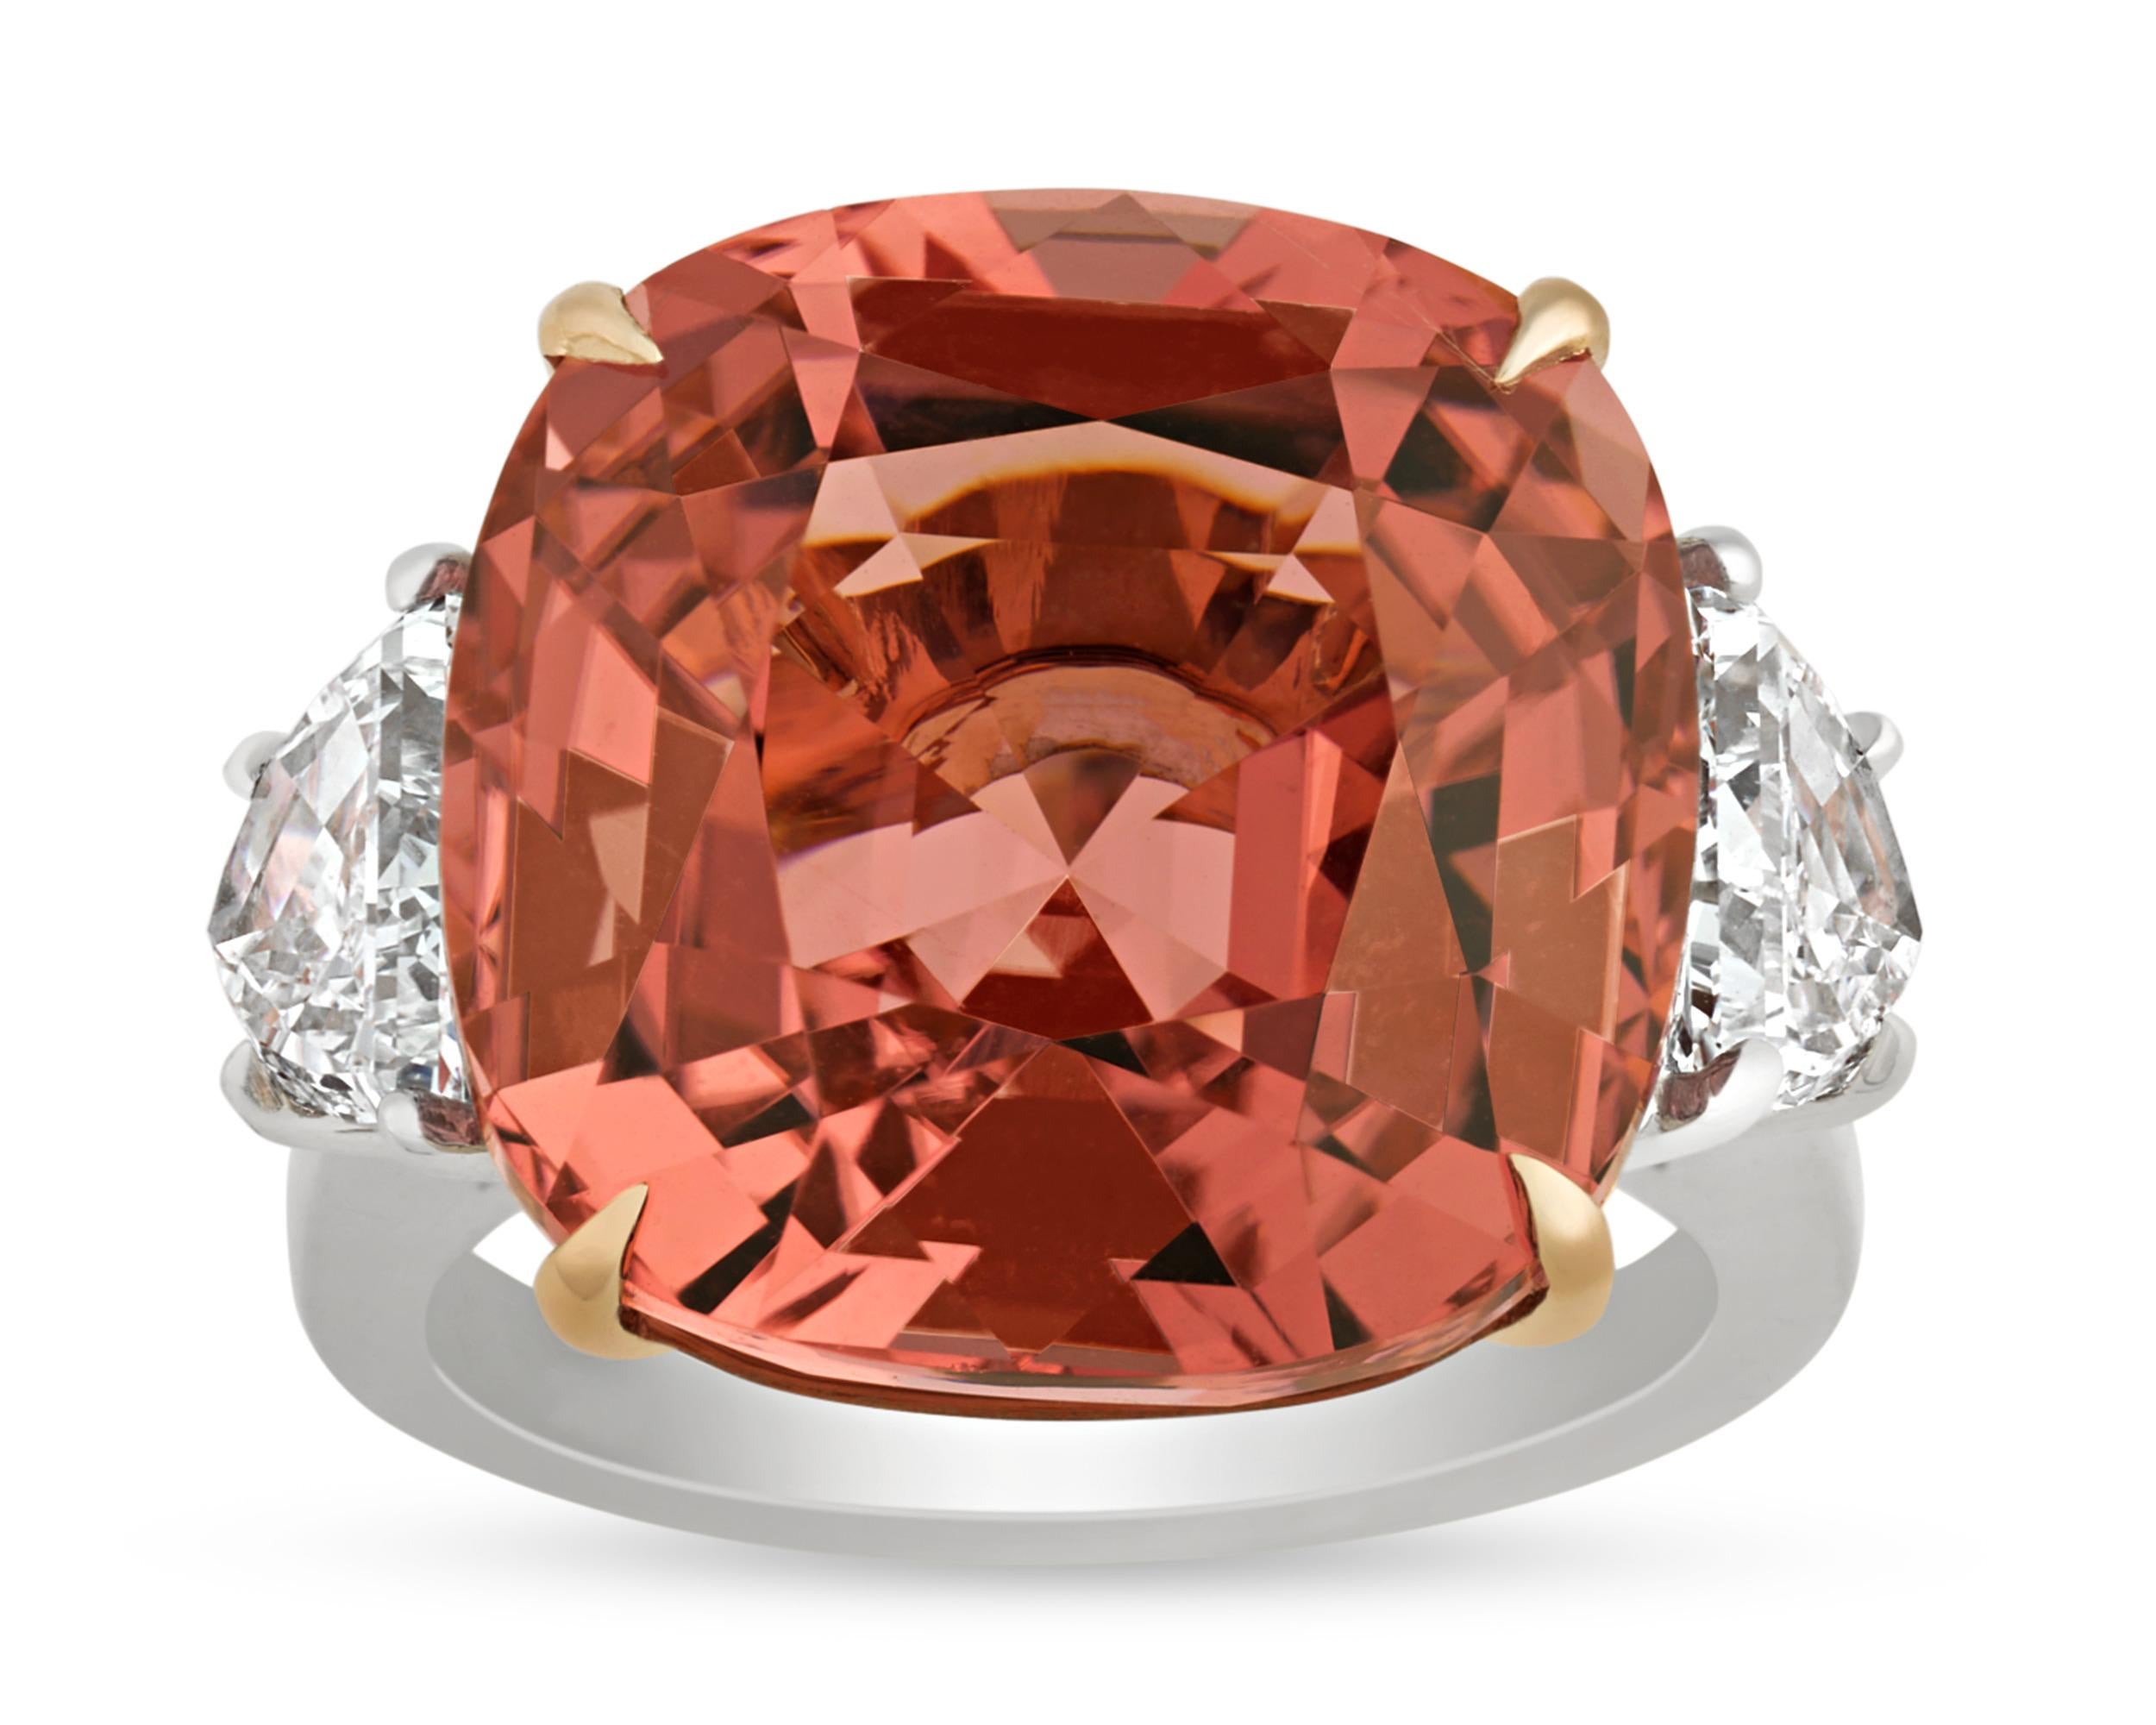 A stunning cushion-cut tourmaline weighing 19.74 carats displays a unique peachy hue at the center of this classic ring. The gemstone's romantic, orangy-pink color is enhanced by two half-moon diamonds weighing a total of 1.53 carats that display G